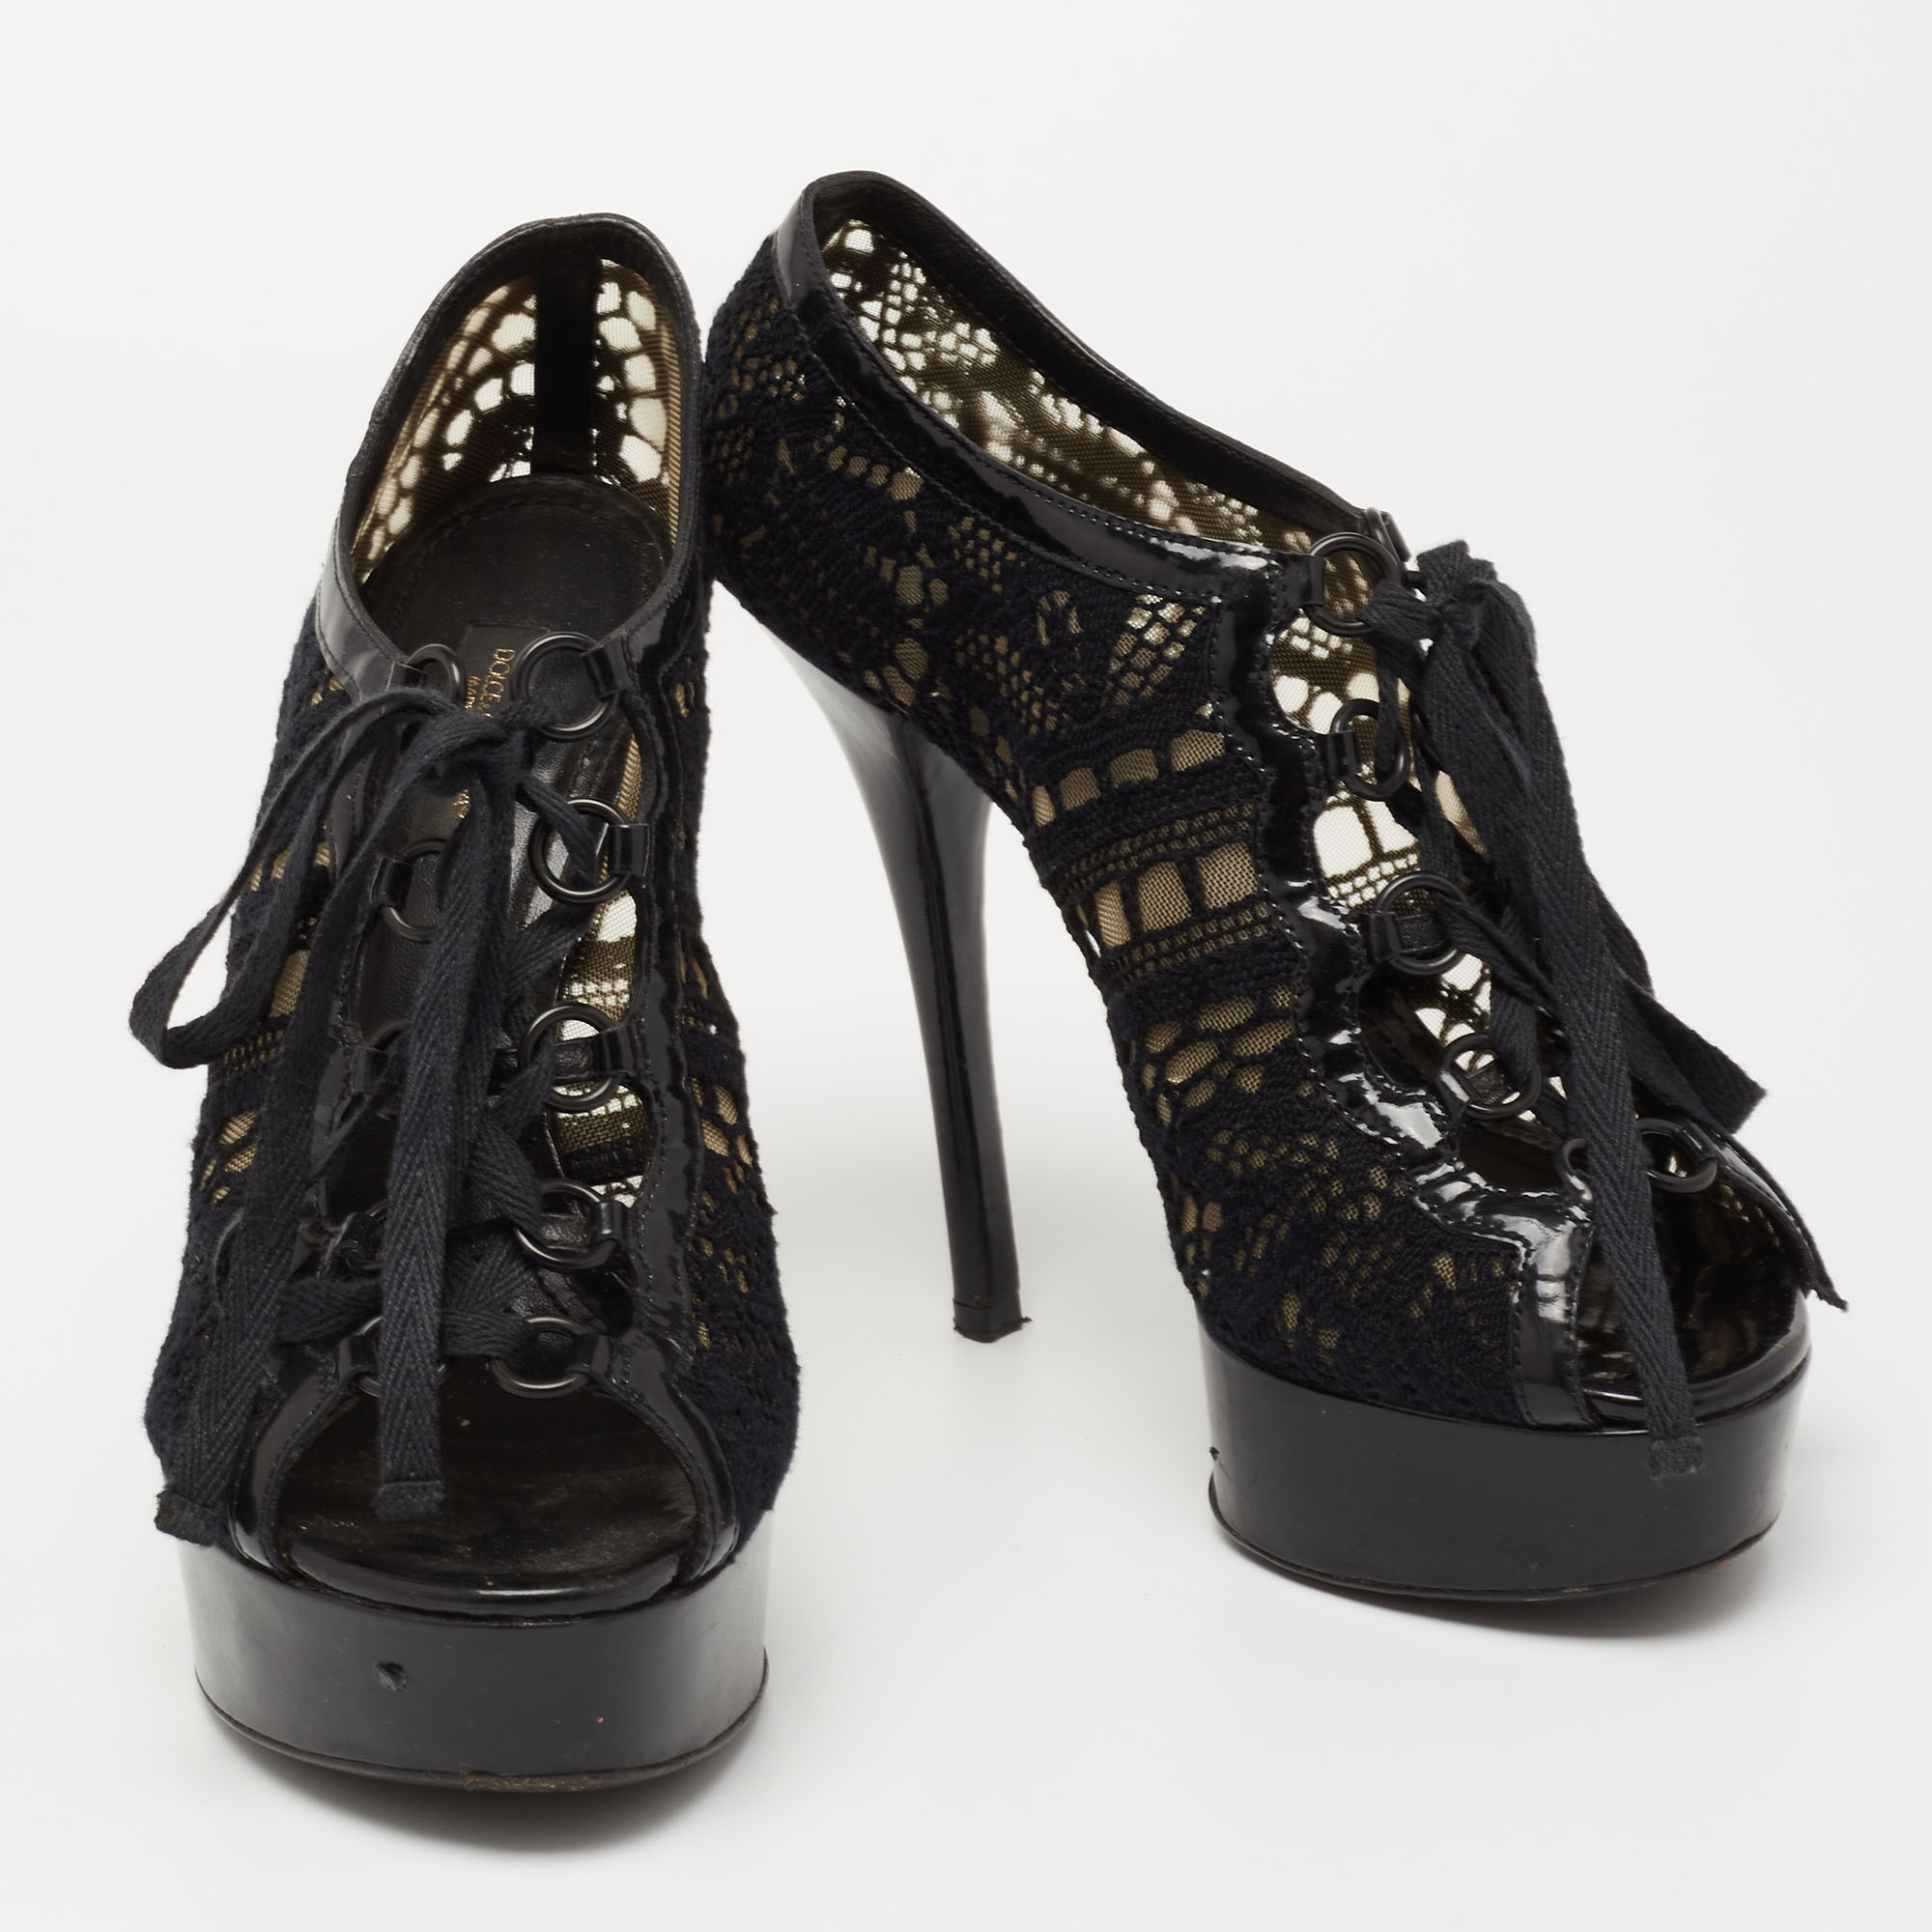 Dolce & Gabbana Black Lace And Patent Leather Lace-Up Peep-Toe Platform Booties Size 37.5